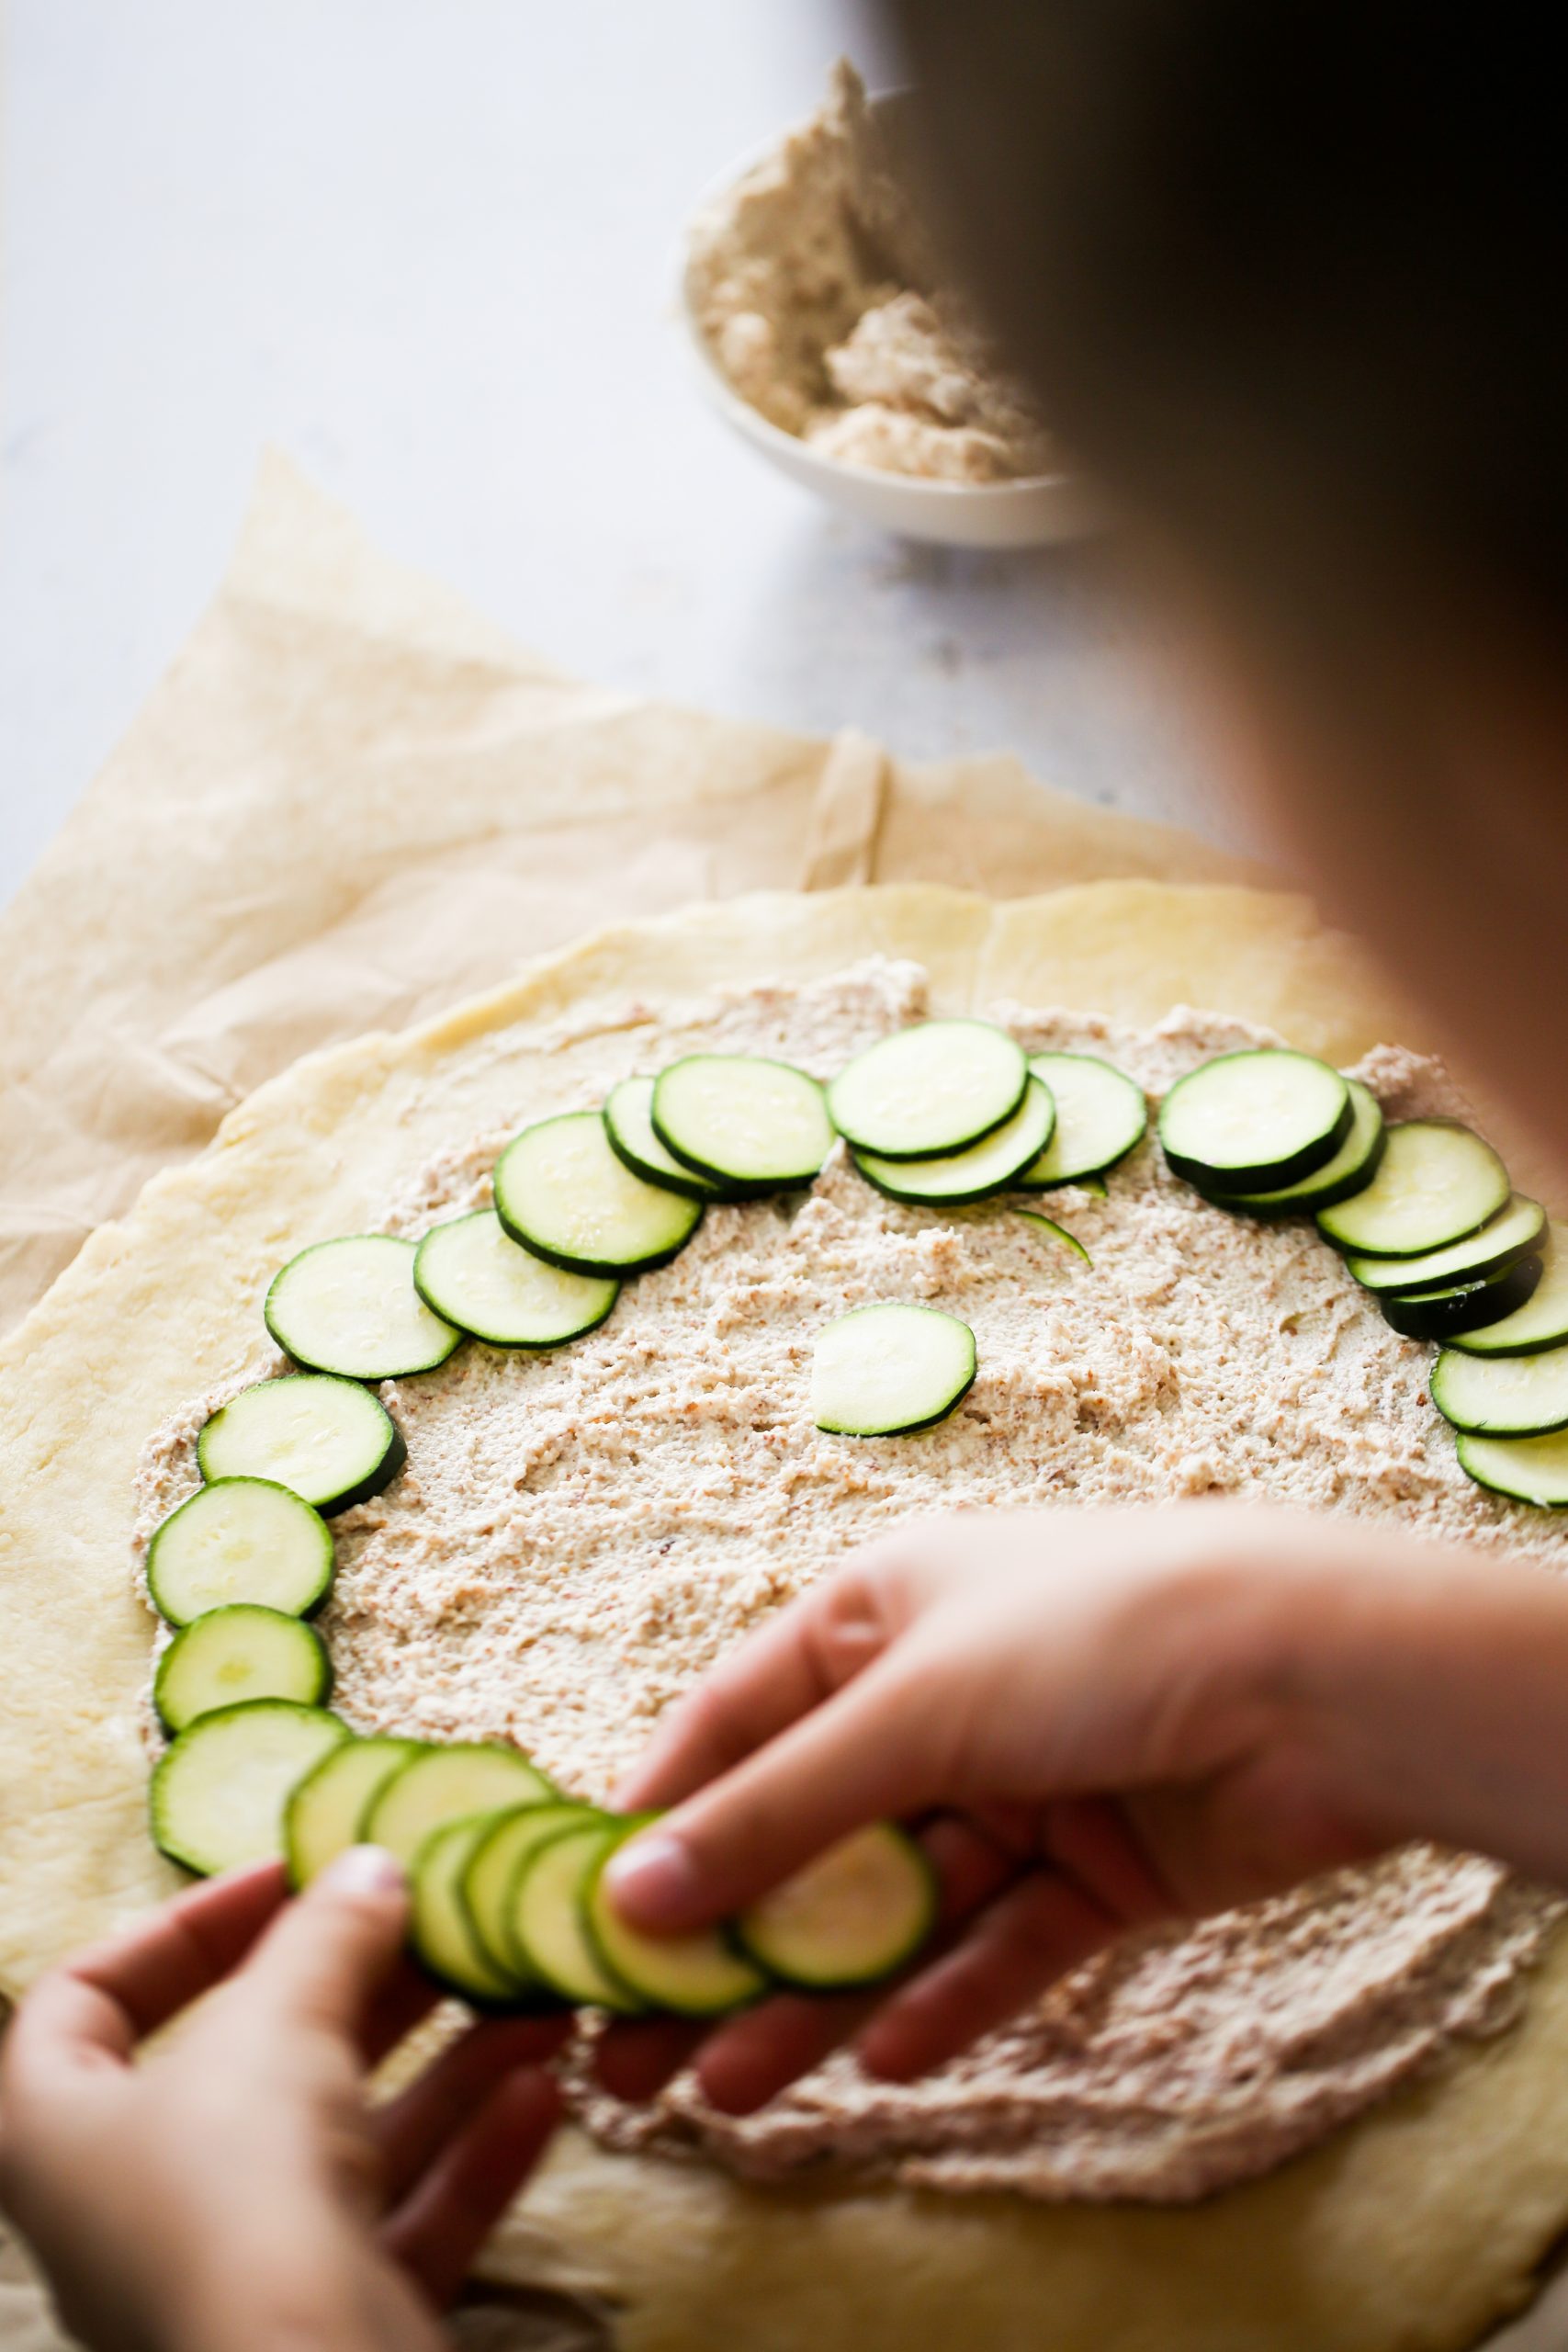 A person is arranging slices of cucumber in a circular pattern on dough spread with a white creamy mixture, creating a delicate zucchini galette. The dough rests on parchment paper, and in the background, slightly out of focus, sits a bowl filled with more of the creamy mixture.